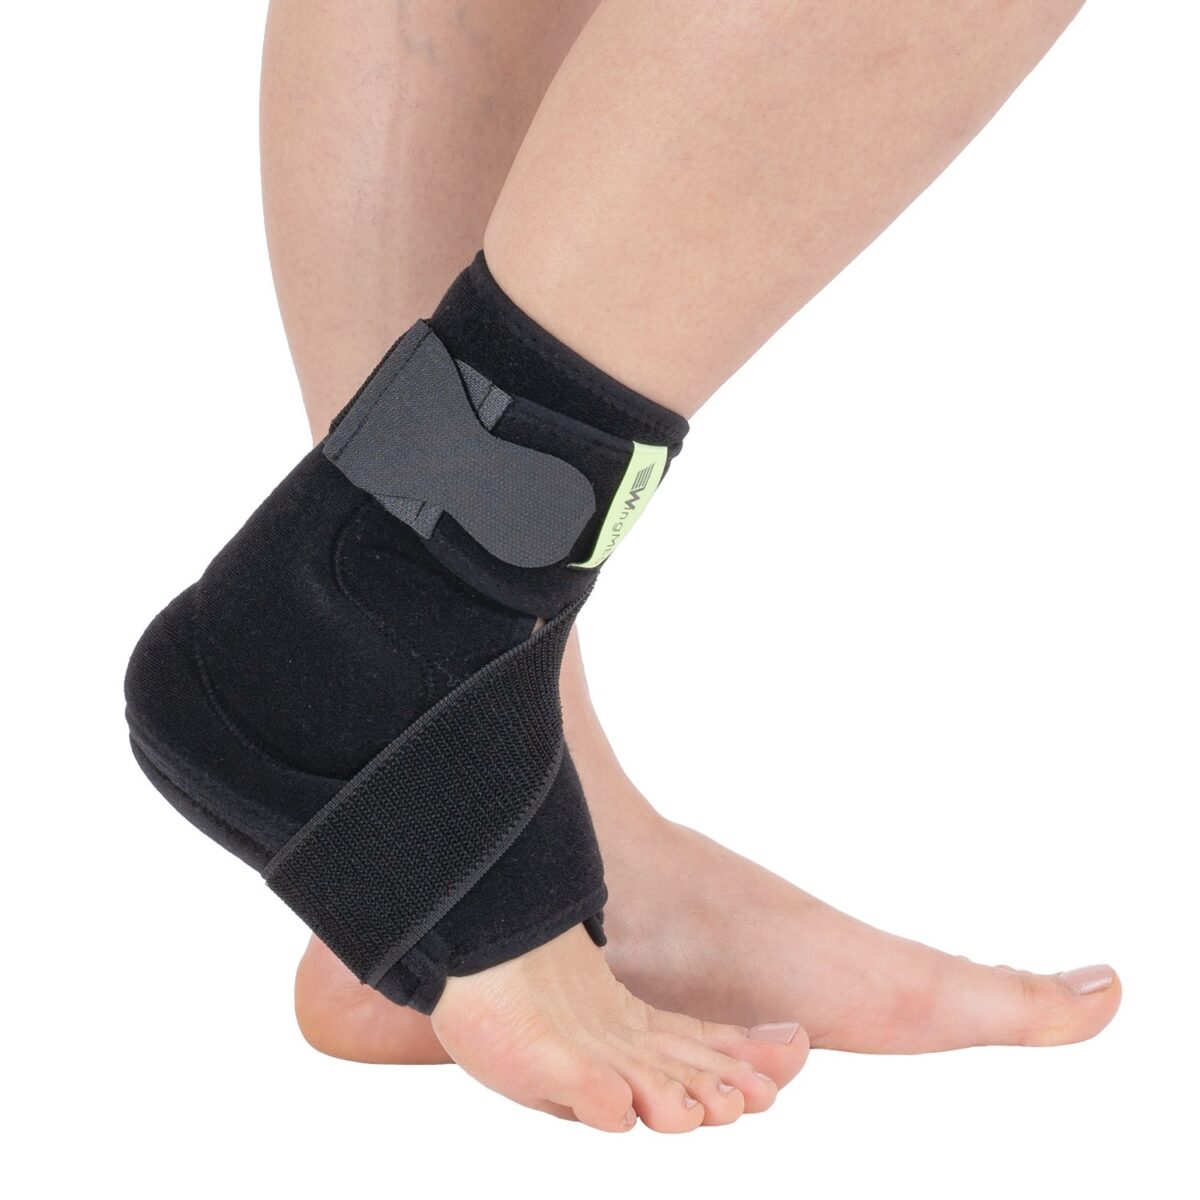 wingmed orthopedic equipments W607 achilles tendon ankle support with 8 strap 52 1 1